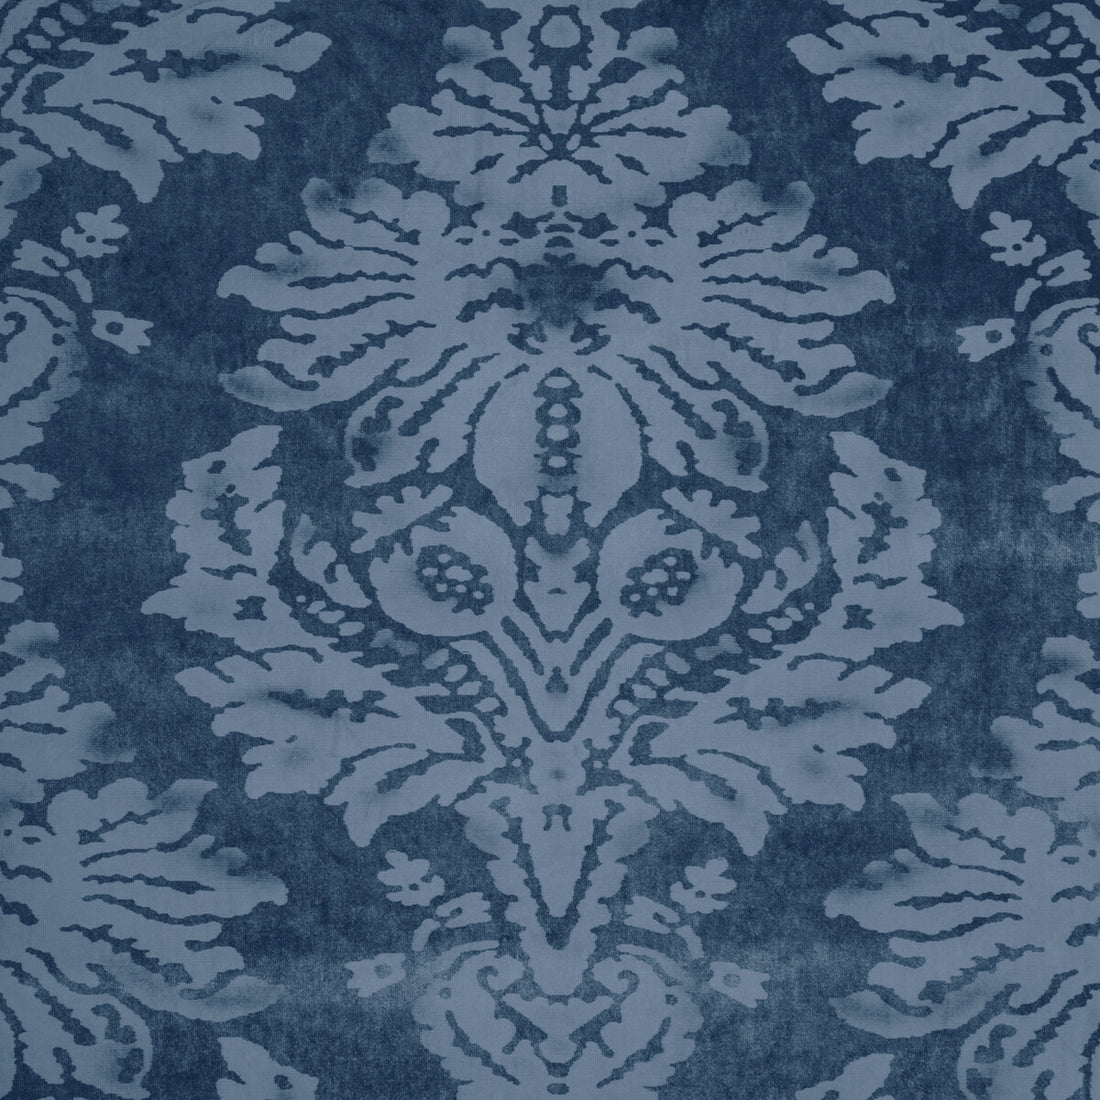 Parham Velvet fabric in azure color - pattern 2023111.50.0 - by Lee Jofa in the Barwick Velvets collection